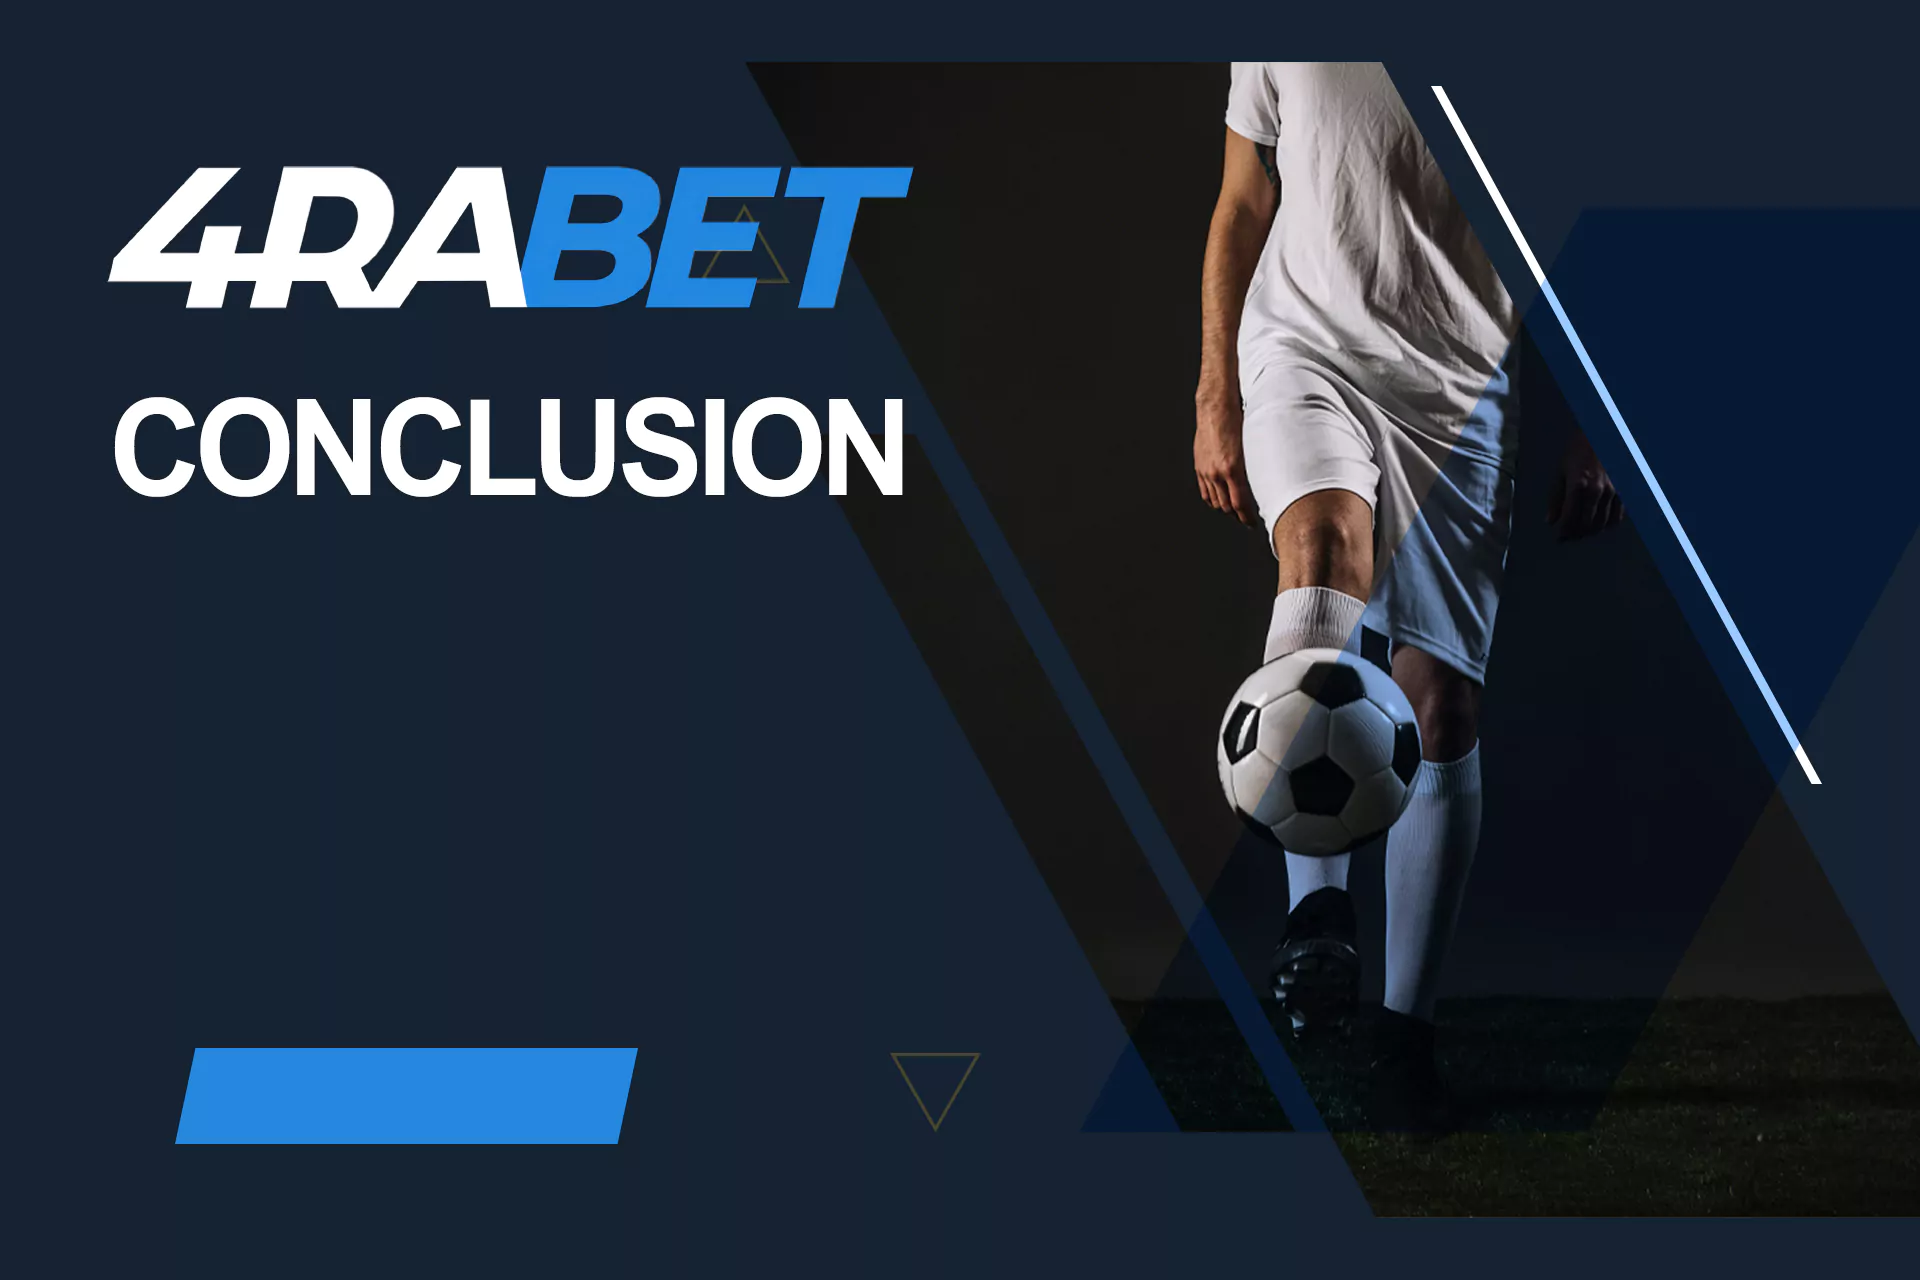 Betting on FIFA events on 4rabet isn't complicated but you have to create an account and make a deposit.